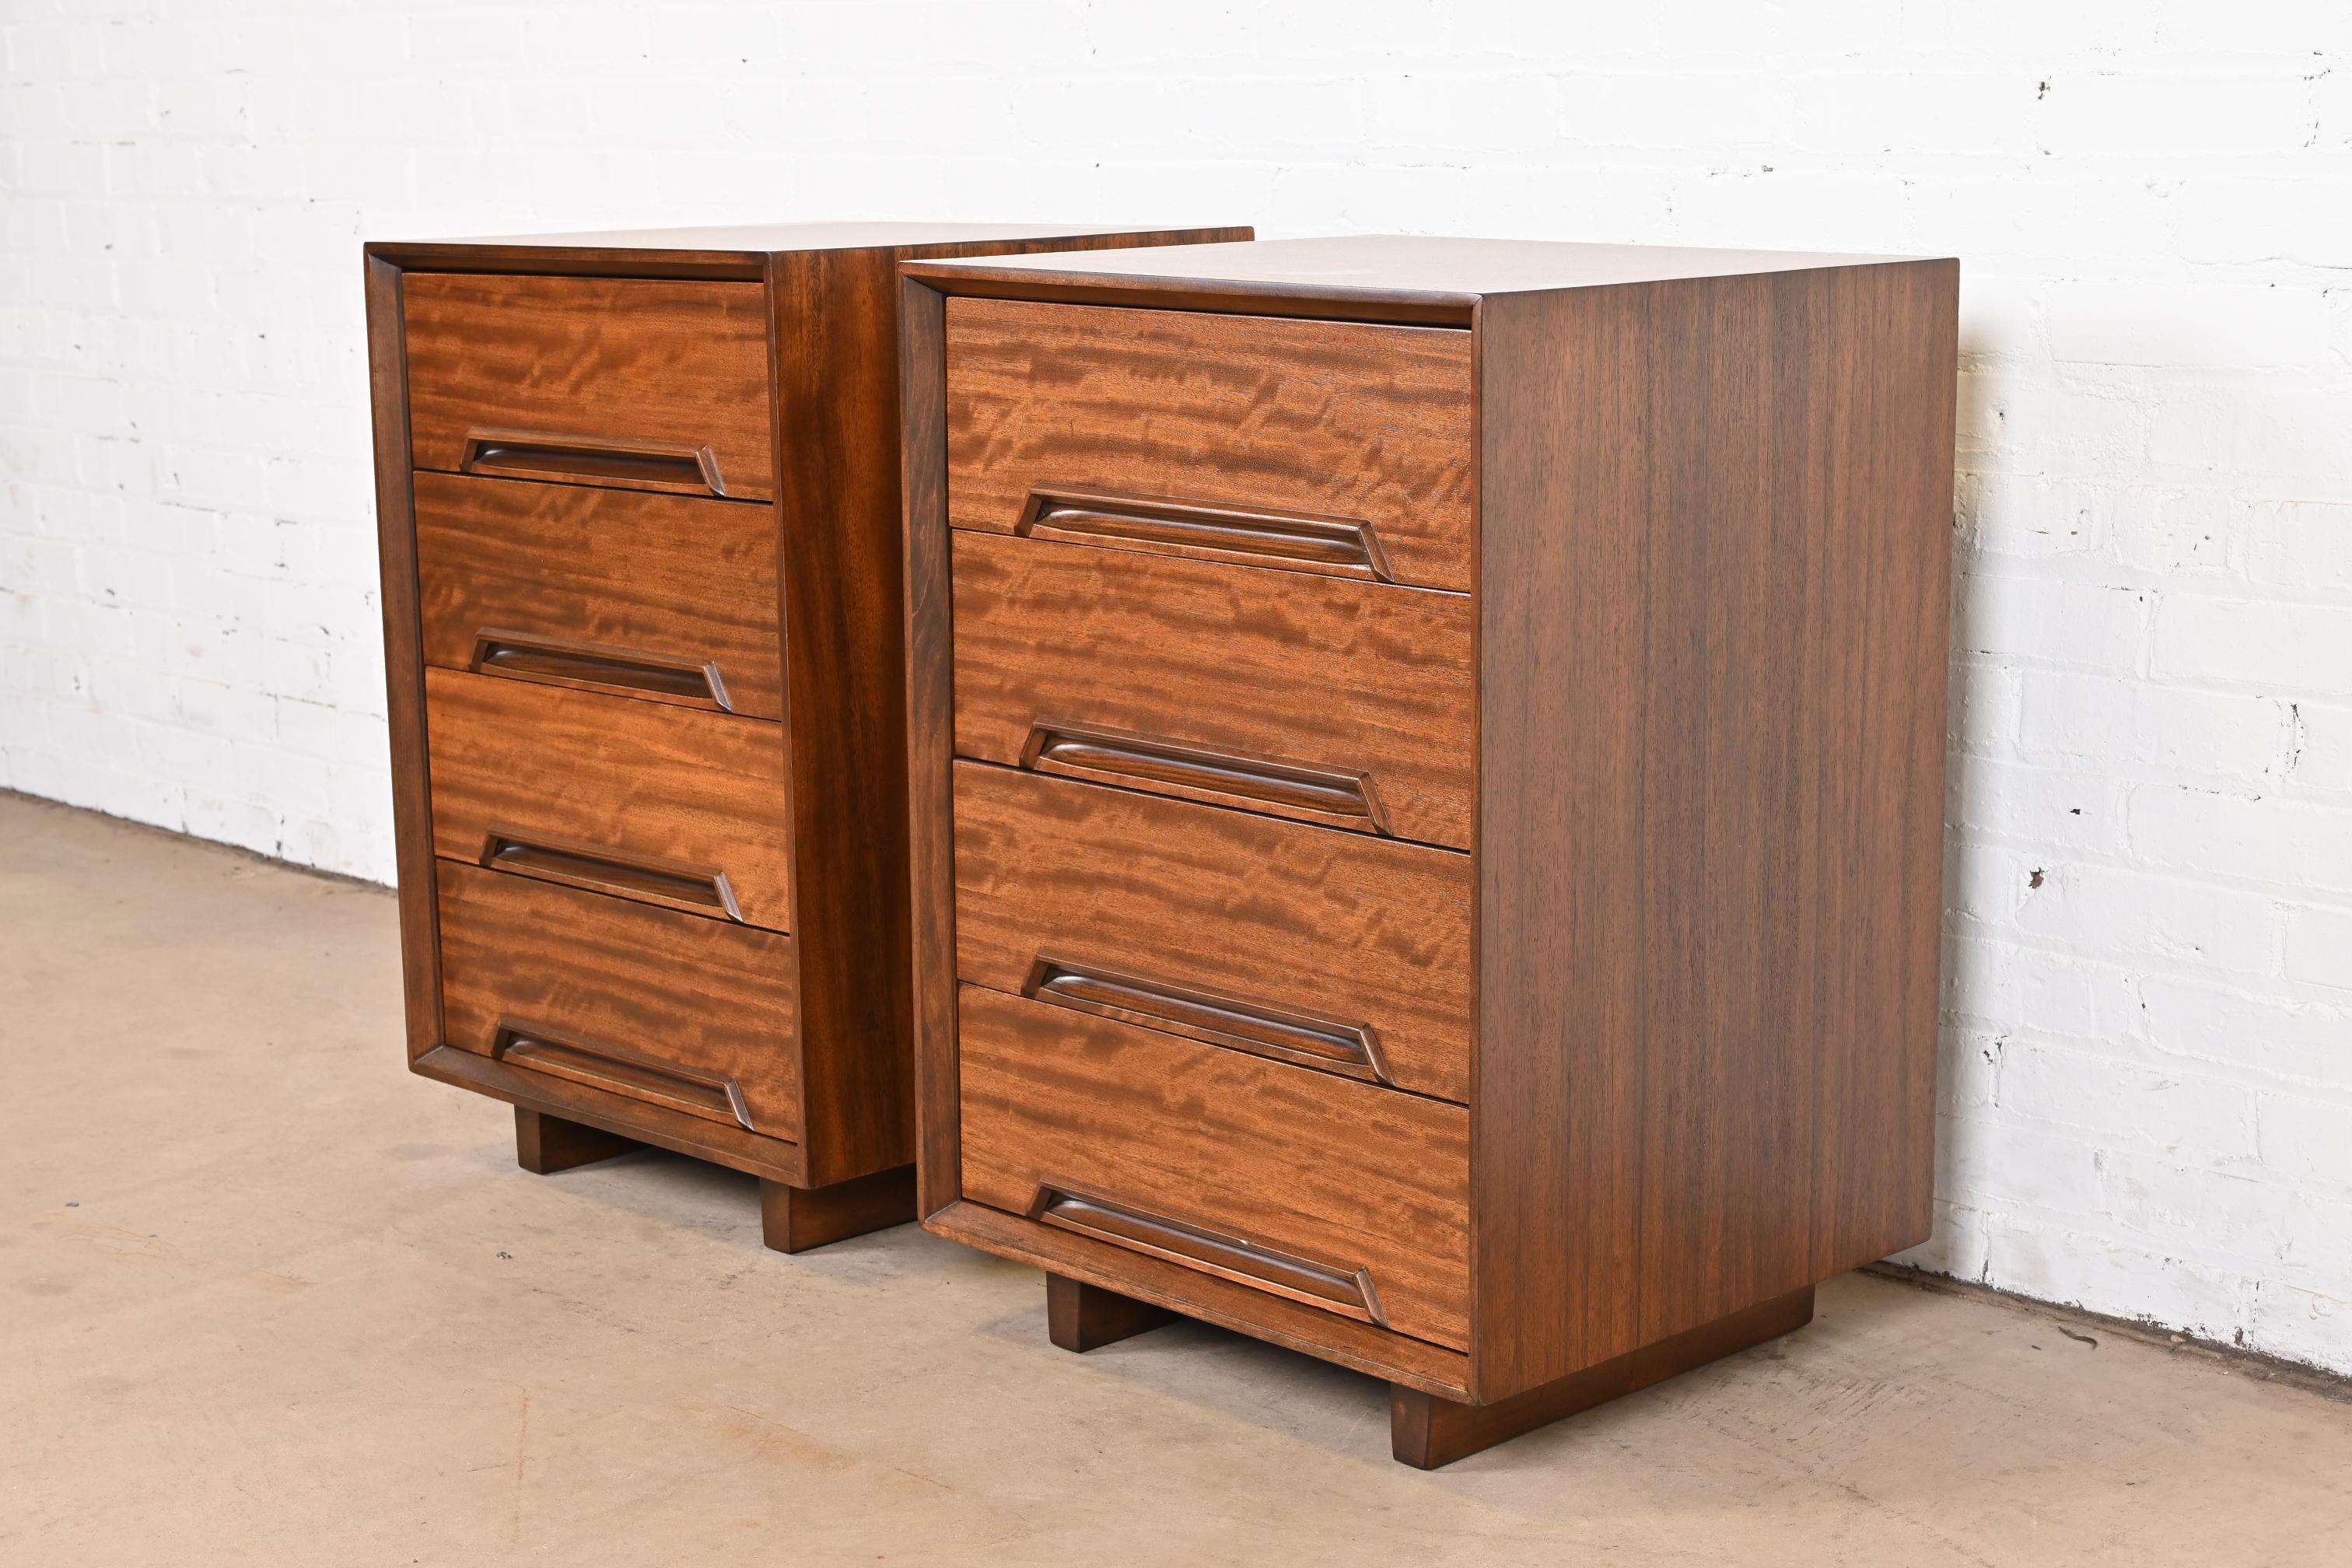 Milo Baughman for Drexel Exotic Mindoro Wood Bedside Chests, Newly Refinished In Good Condition For Sale In South Bend, IN